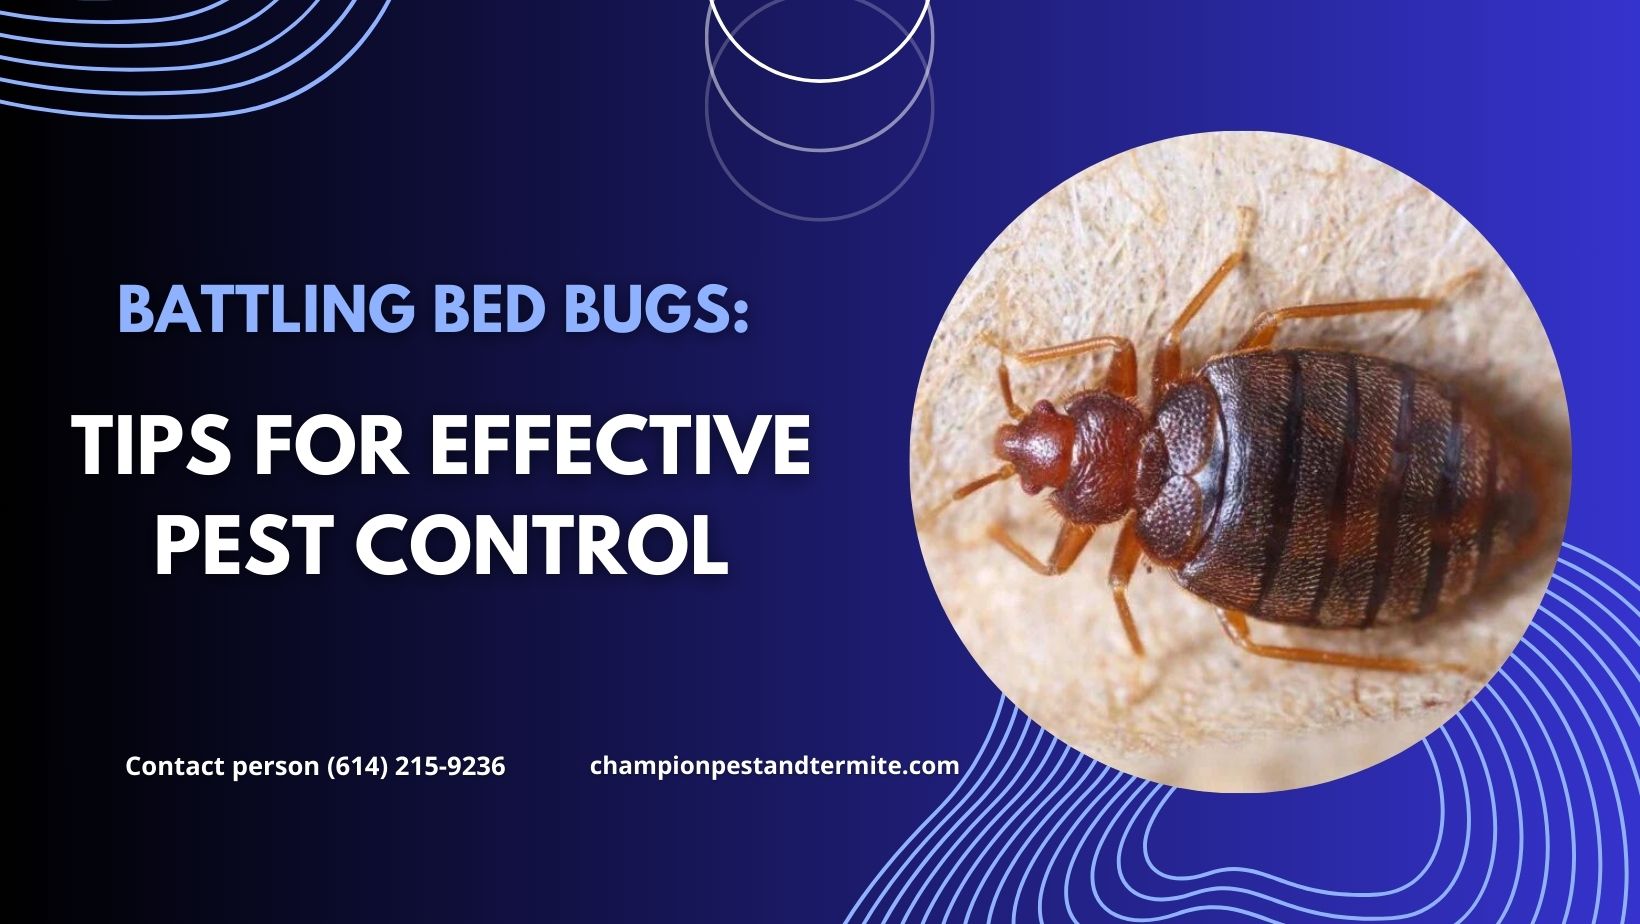 Battling Bed Bugs: Tips for Effective Pest Control